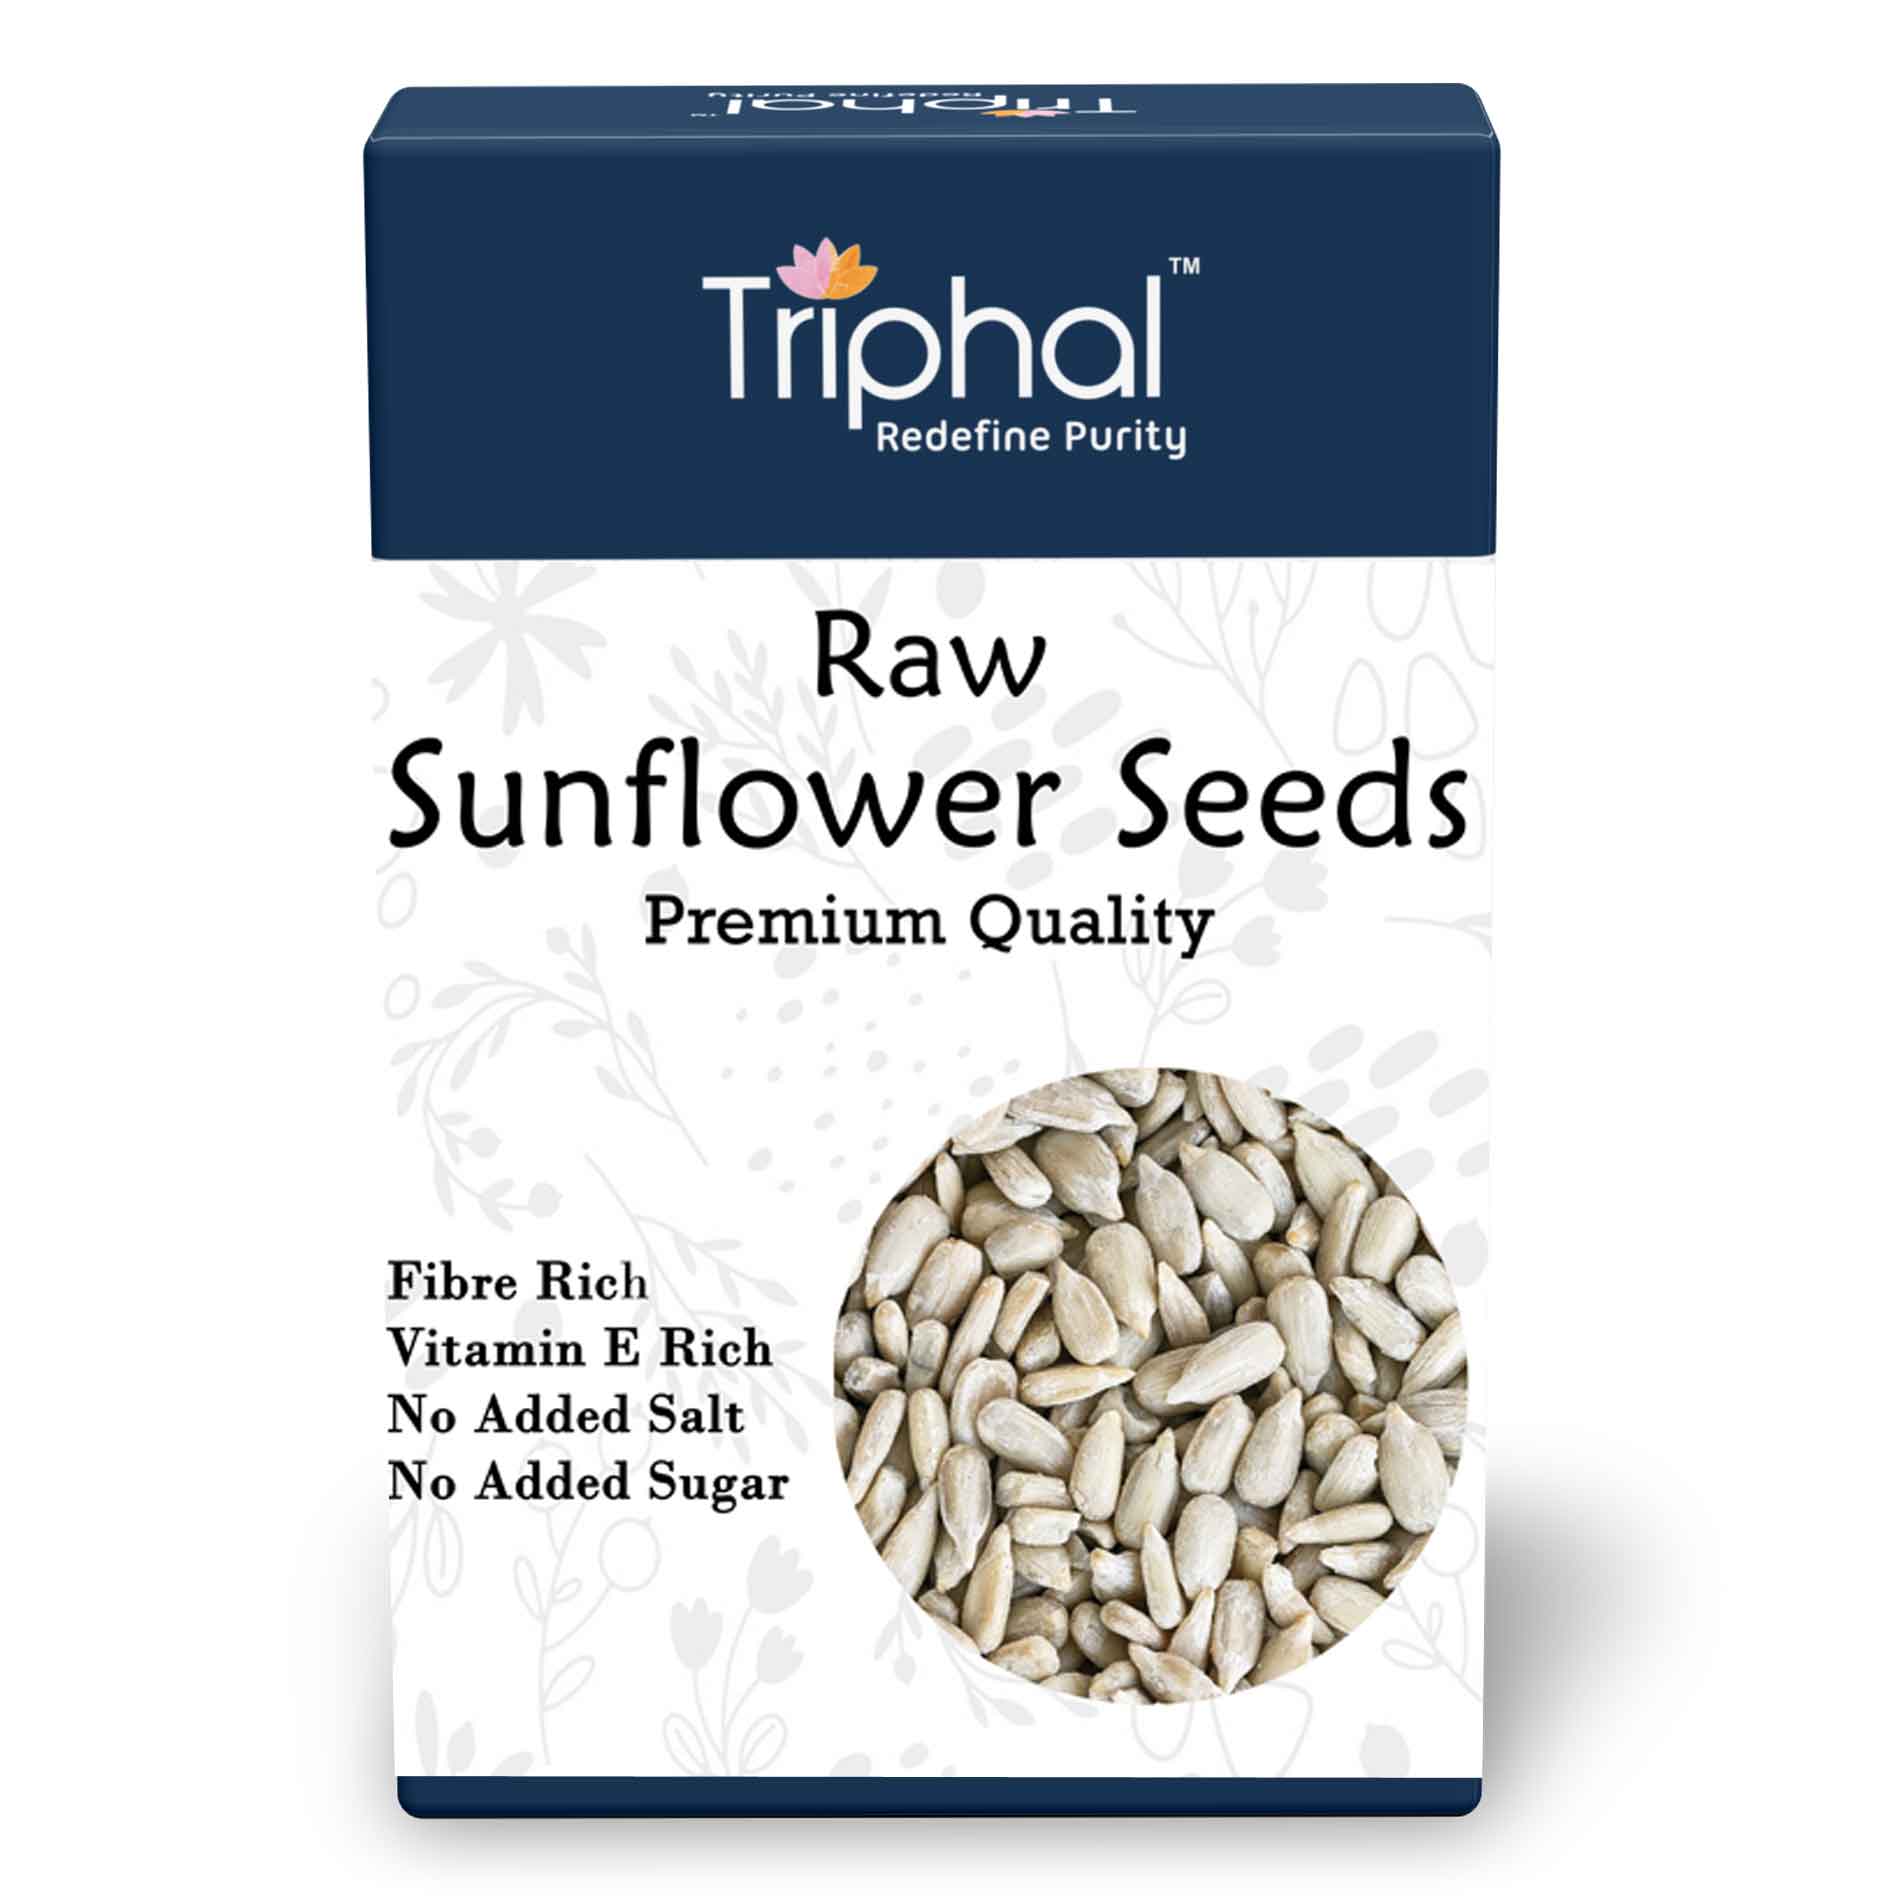 Fresh and Nutritious Raw Sunflower Seeds - A Delicious and Healthy Snack for Any Time of Day